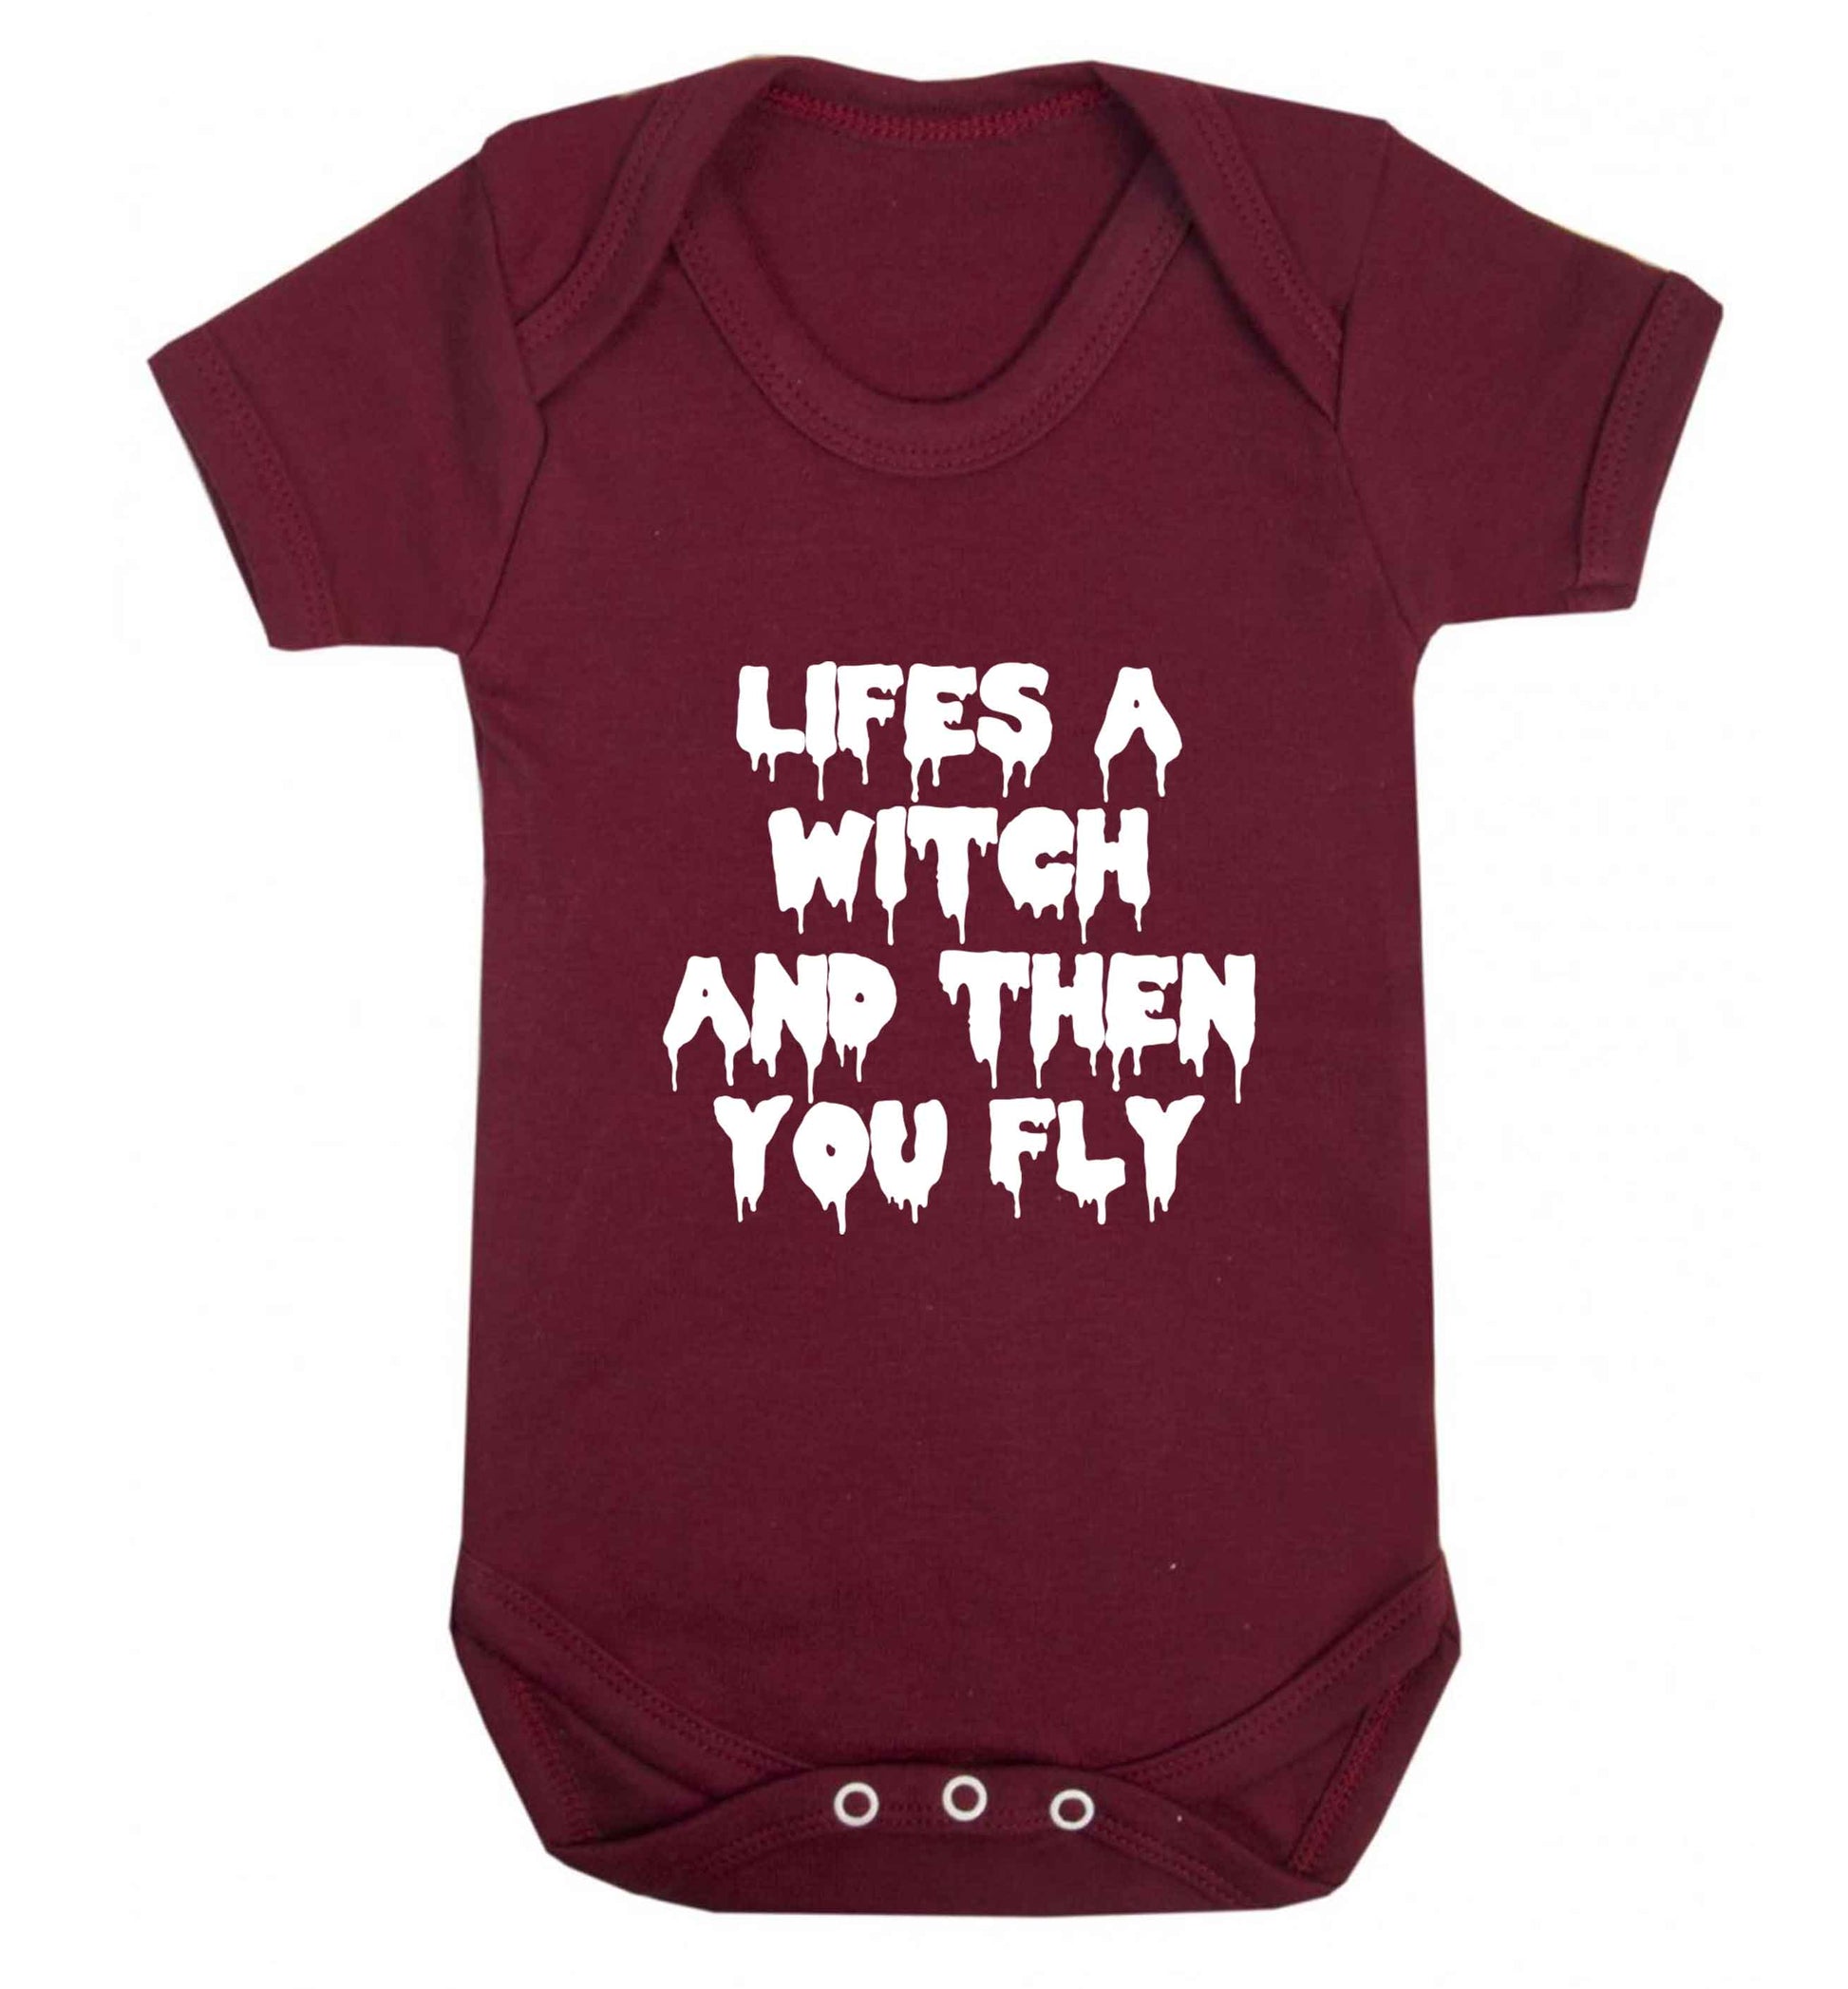 Life's a witch and then you fly baby vest maroon 18-24 months